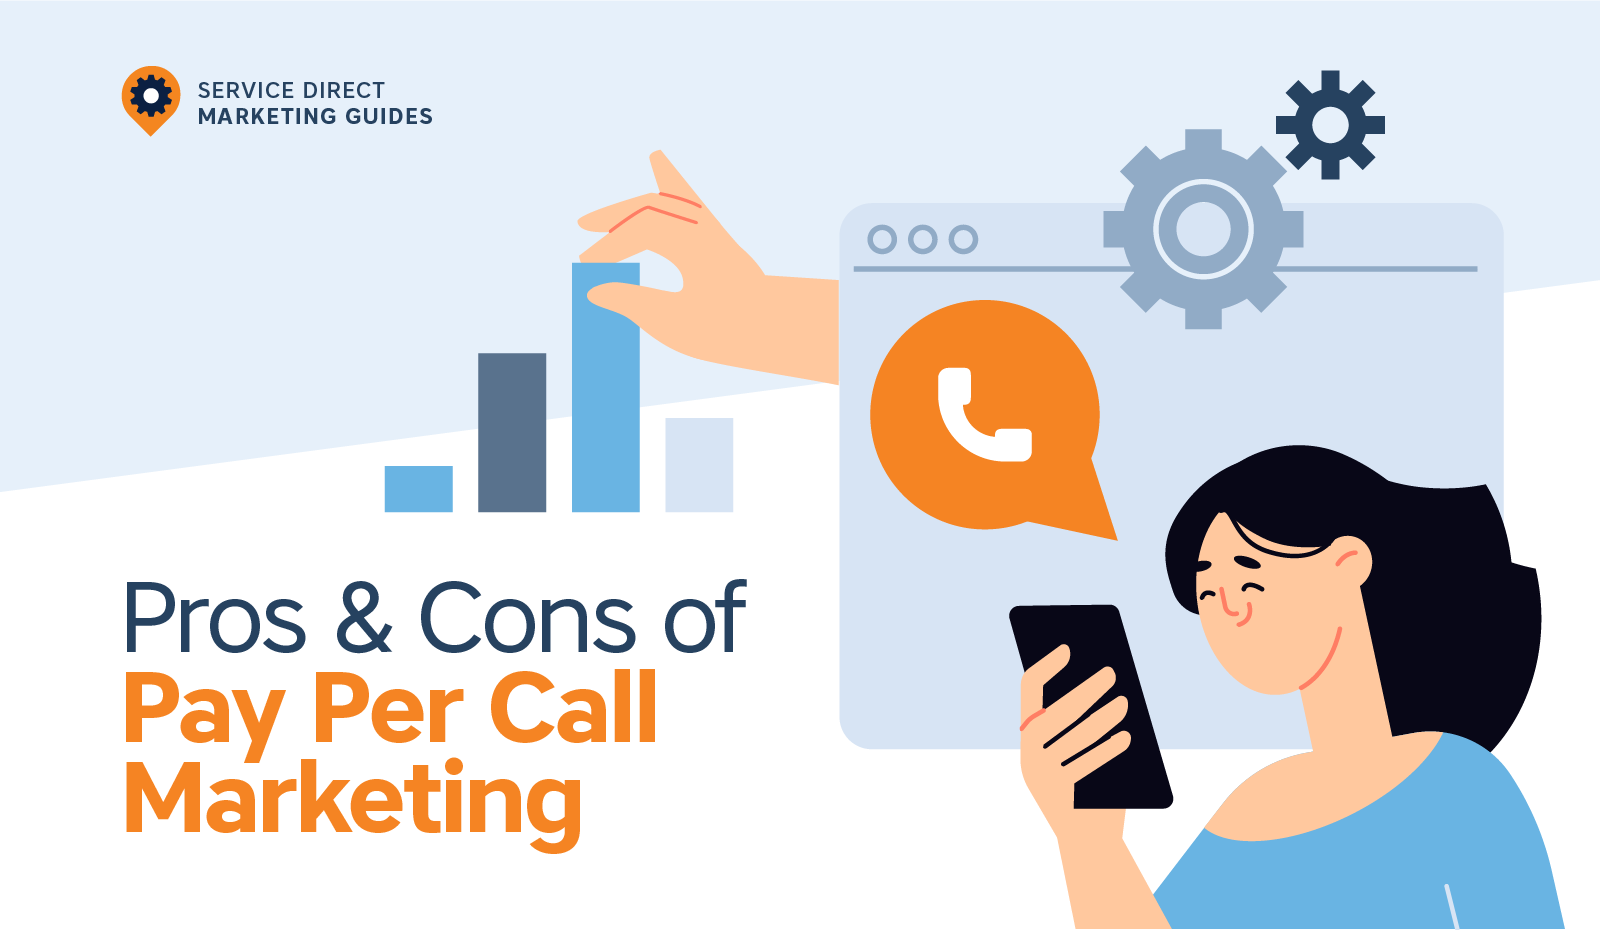 The Pros and Cons of Pay Per Call Marketing